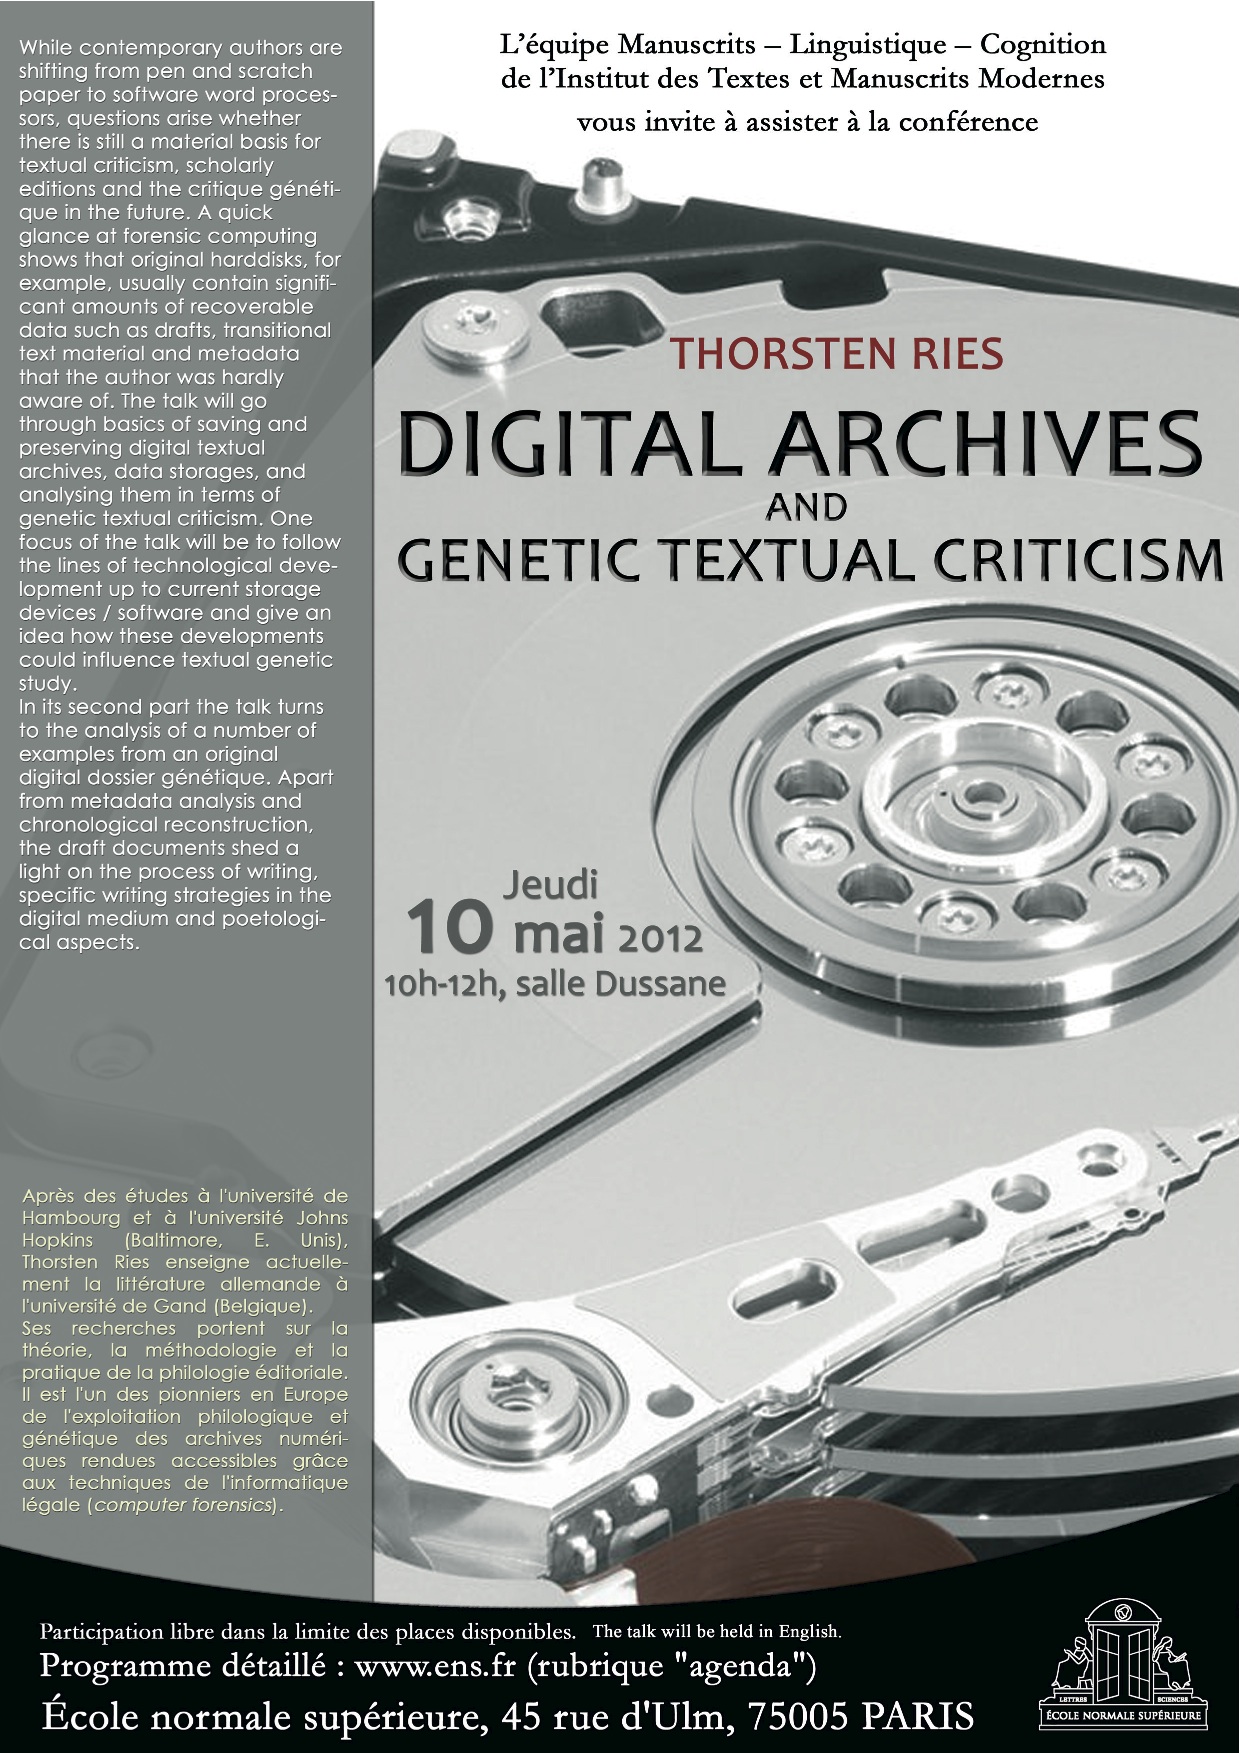 Thorsten Ries : Digital Archives and Genetic Textual Criticism